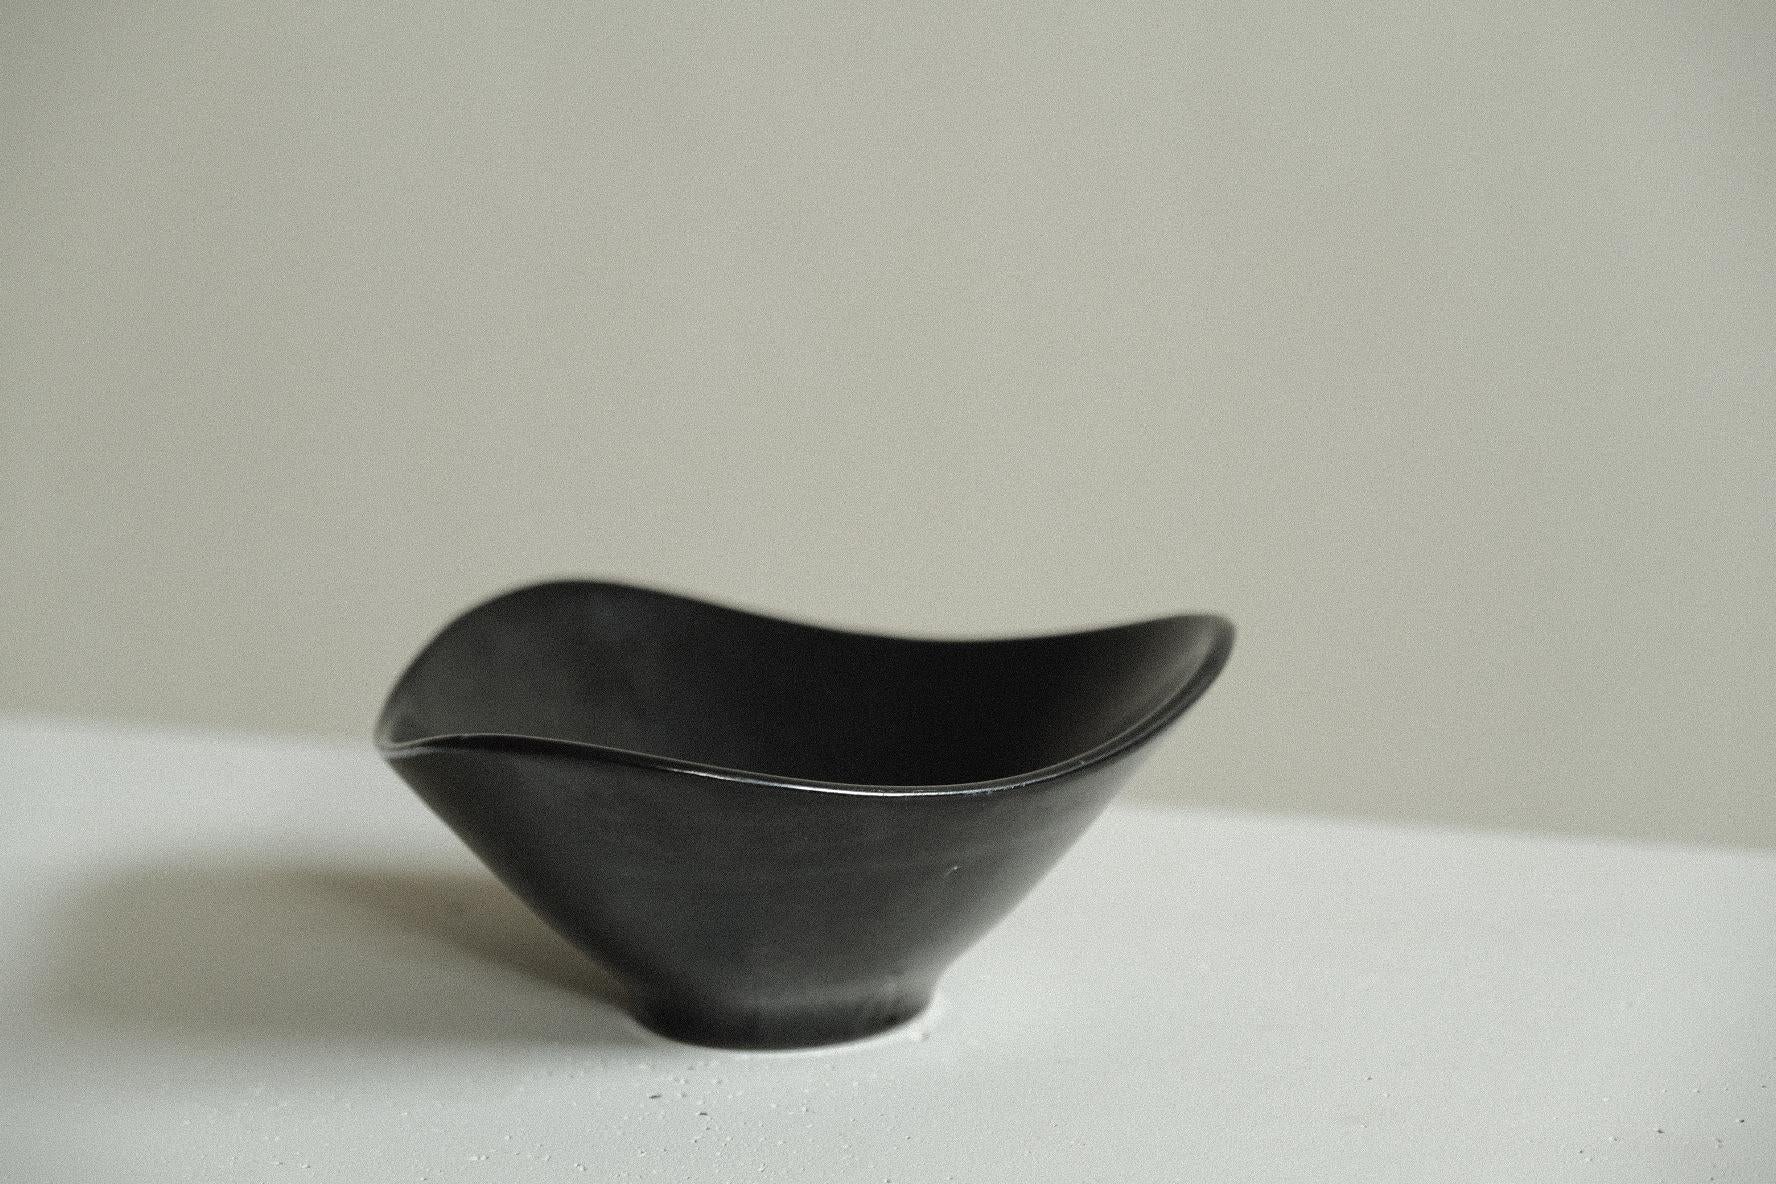 A beautiful black stoneware bowl with organic shapes, produced in Norway in the 1950s. 

In good vintage condition consistent with age and use.